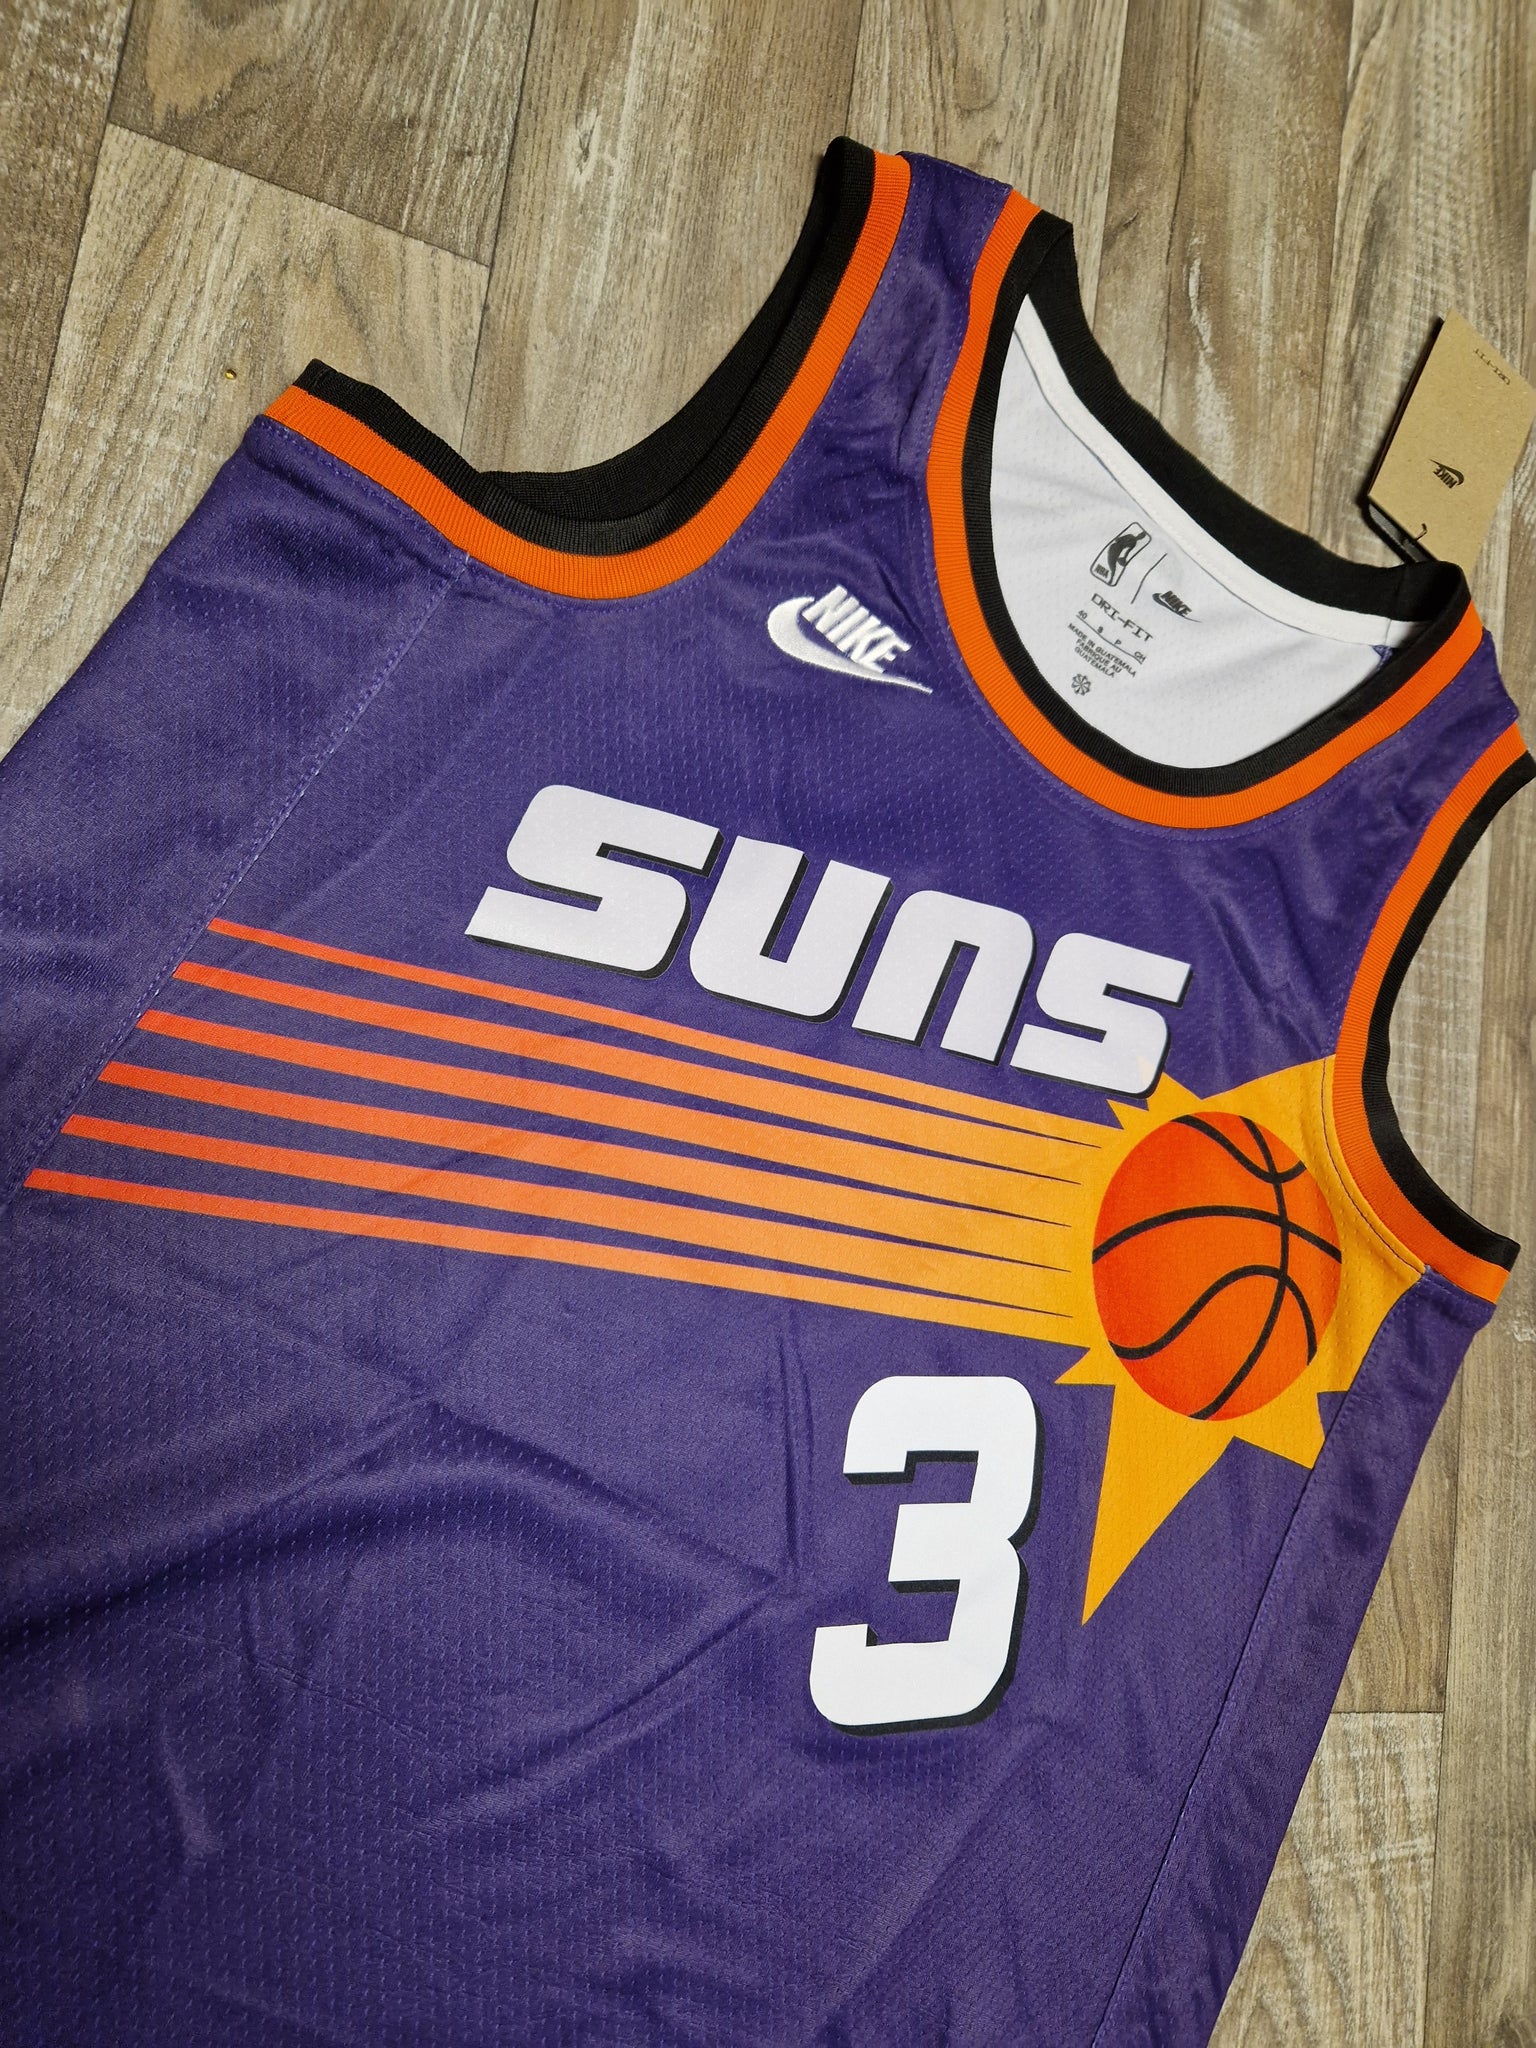 🏀 Chris Paul Phoenix Suns Jersey Size Small – The Throwback Store 🏀